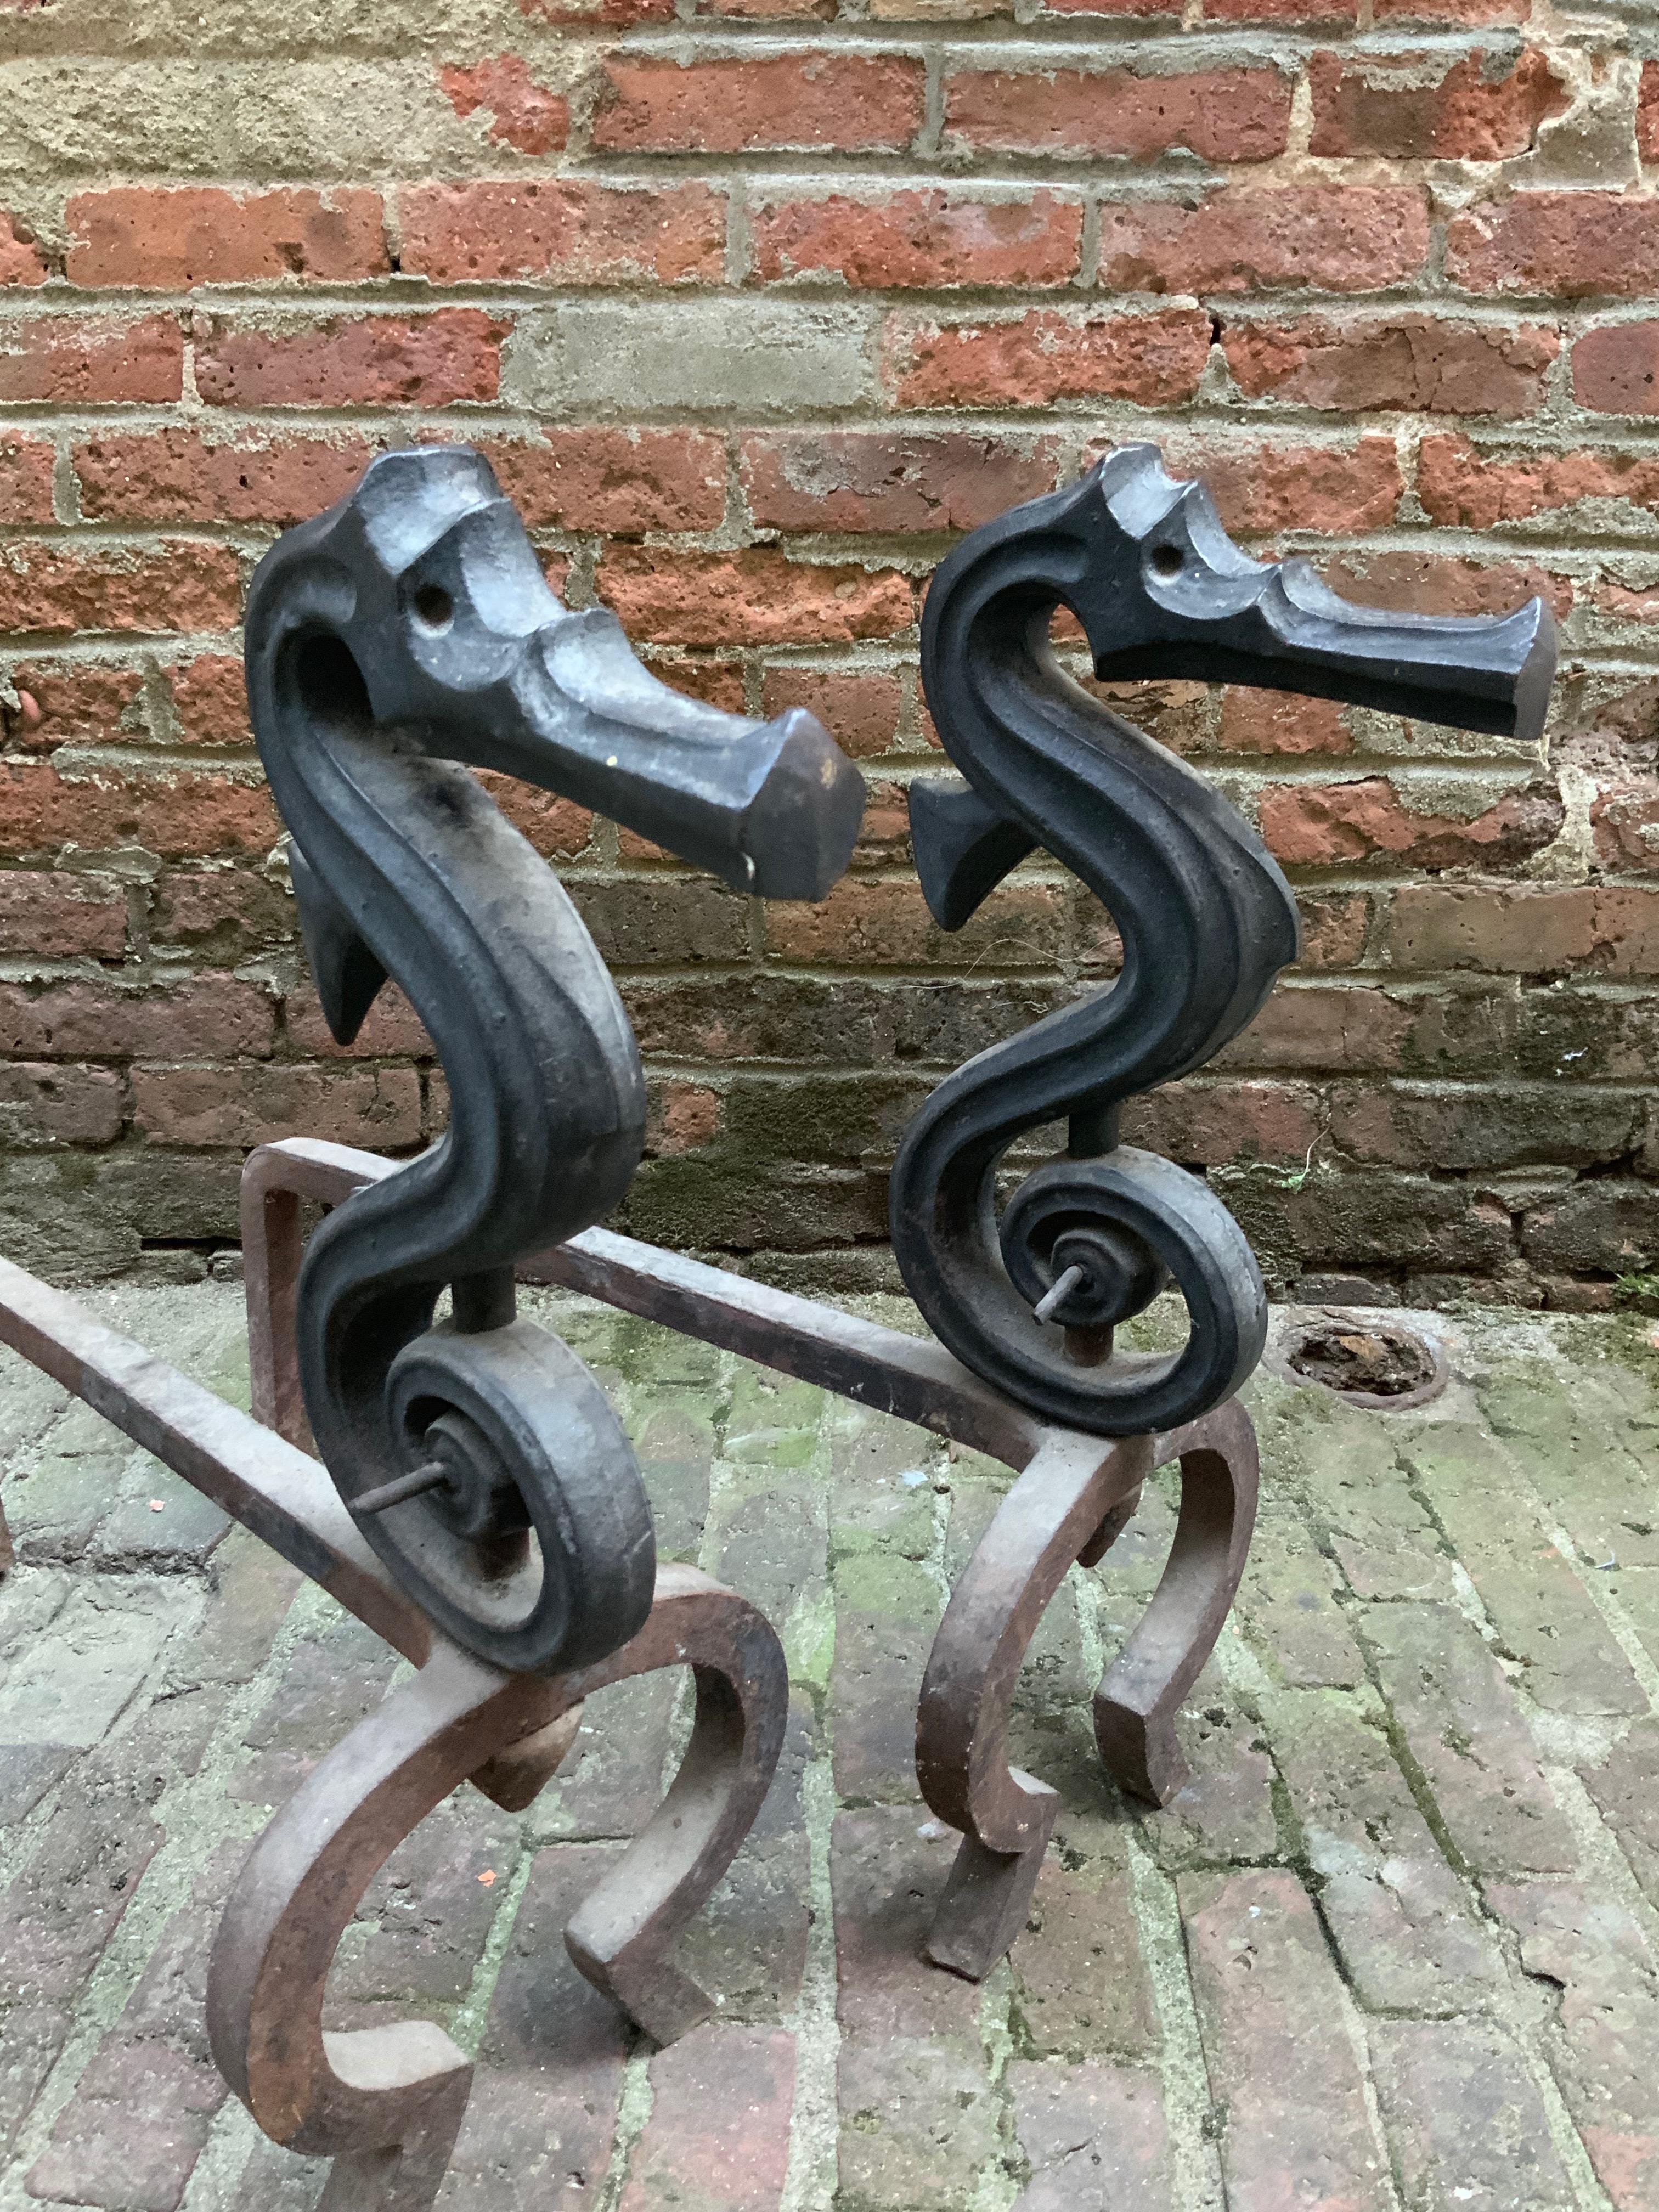 Sublime pair of heavy duty andirons. Stylized late Victorian seahorse andirons. Very good condition considering their age and use. Wear, rusting and pitting to the stands. Structurally sound and sturdy.

Measures: 28